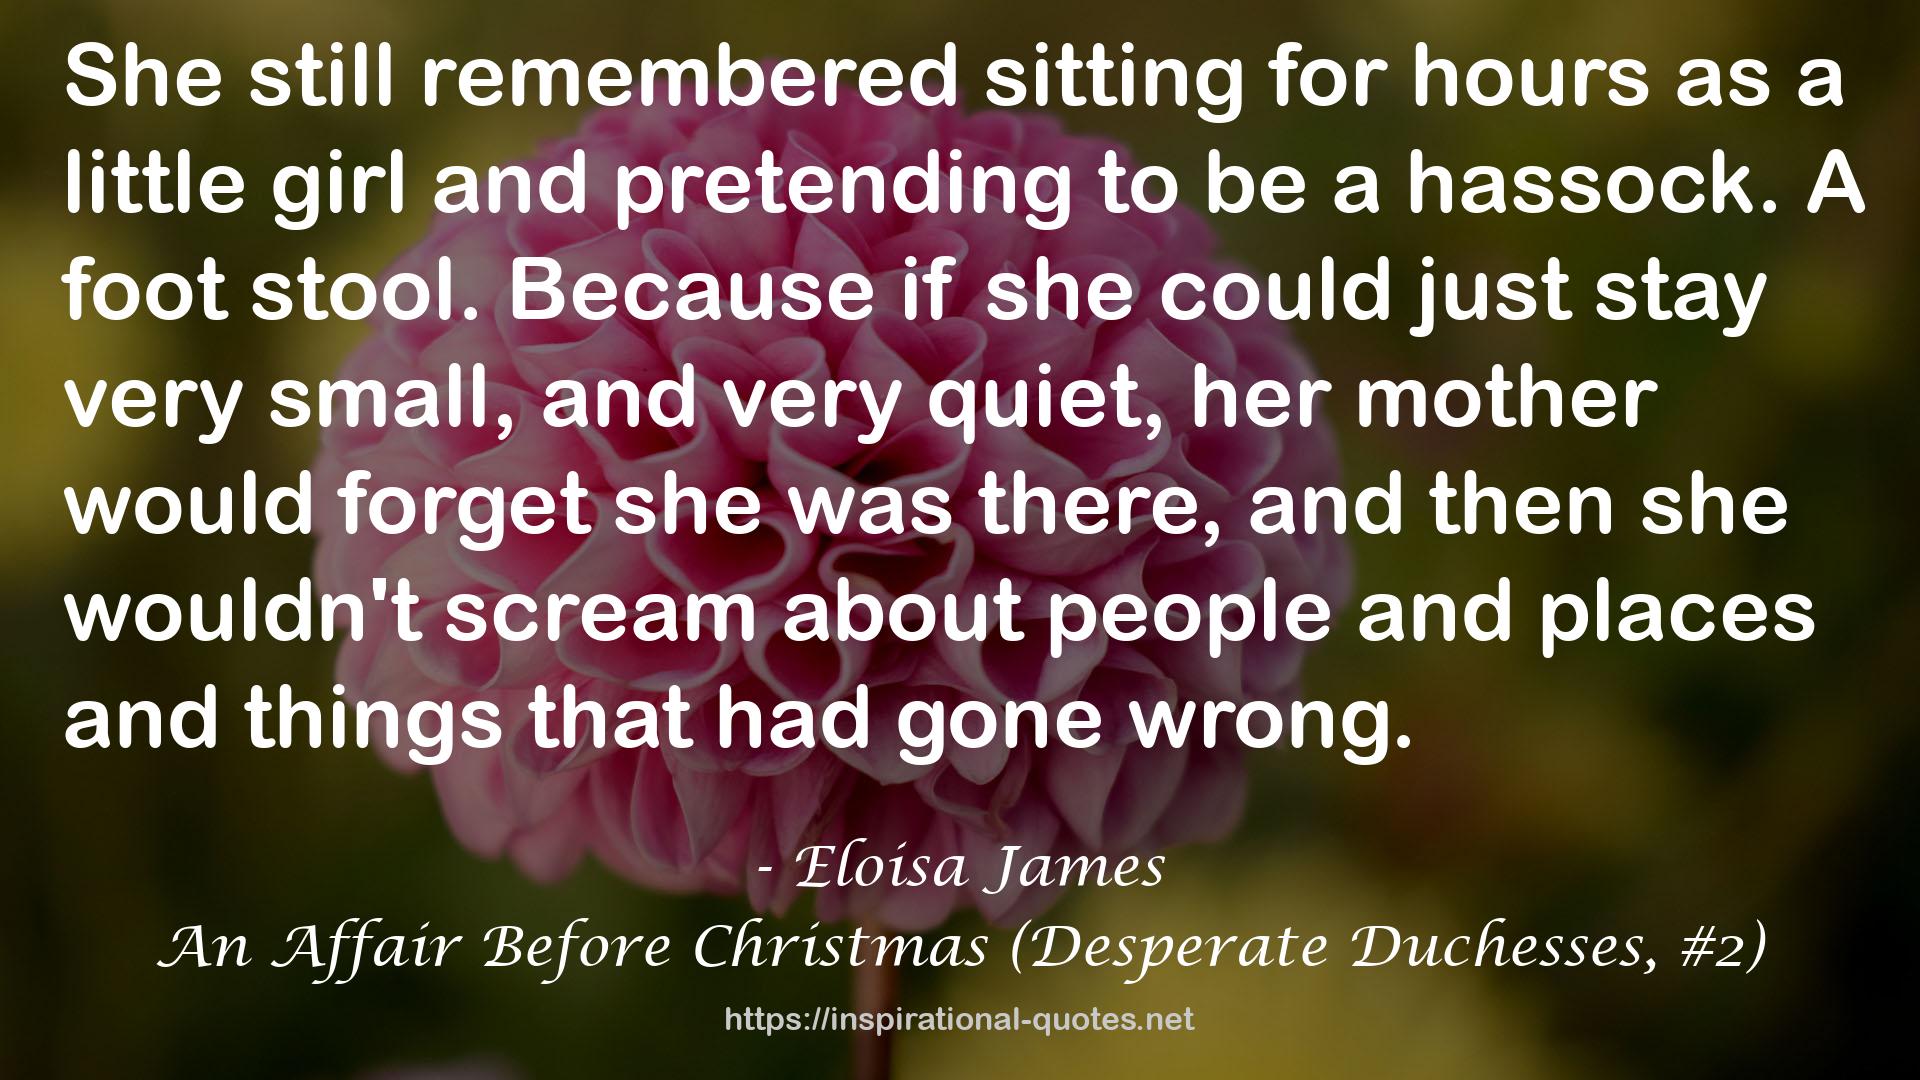 An Affair Before Christmas (Desperate Duchesses, #2) QUOTES